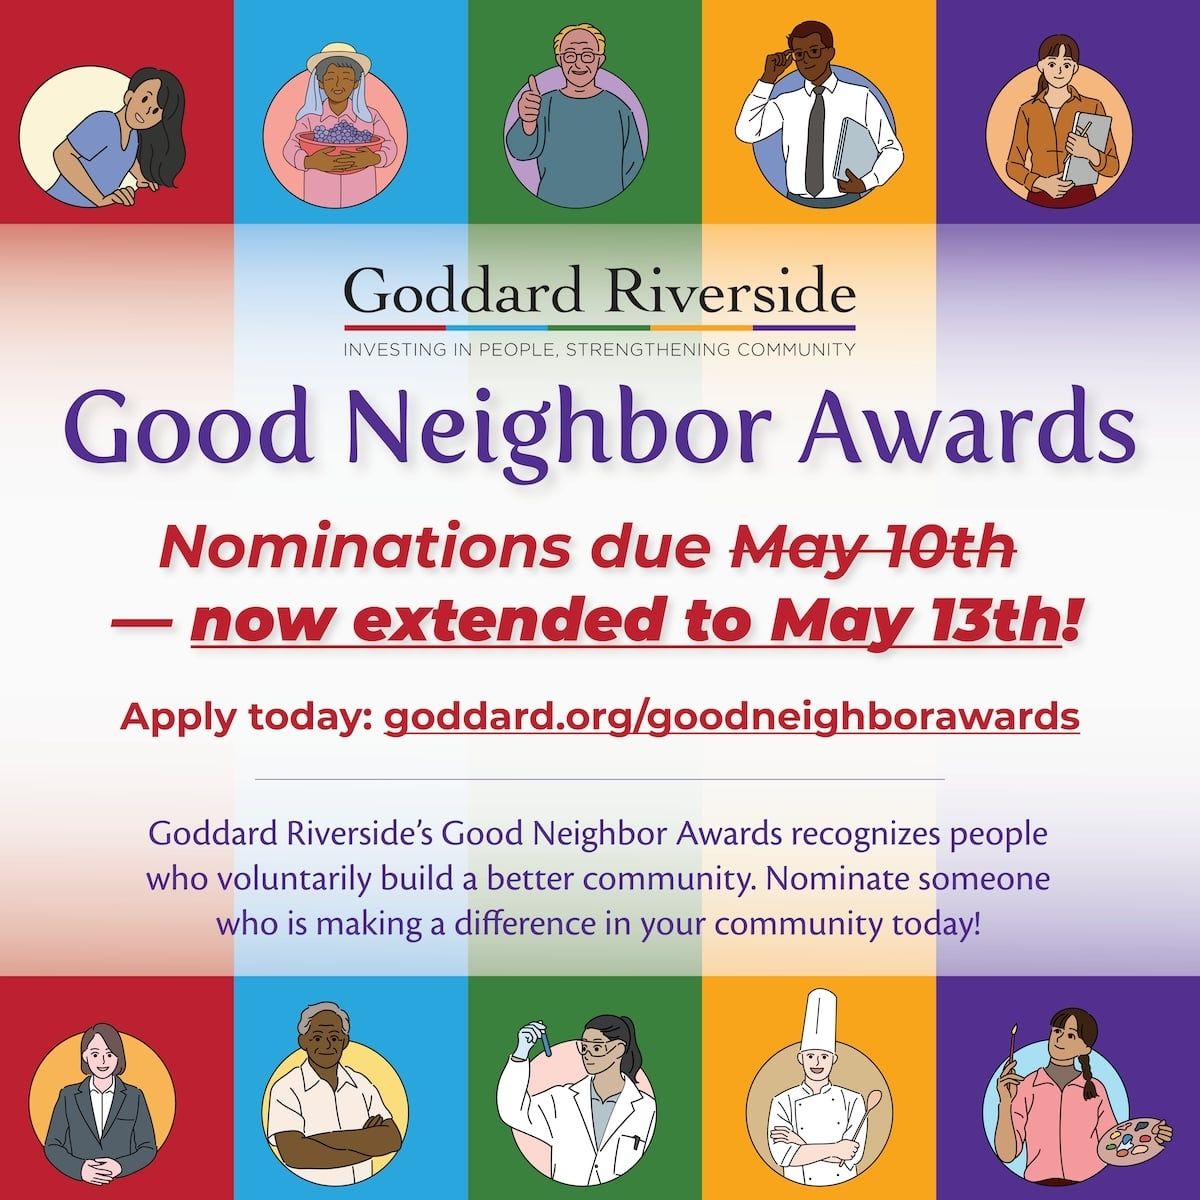 Nominations Extended for Good Neighbor Awards! buff.ly/4a9gyMX @goddardriv #sponsored